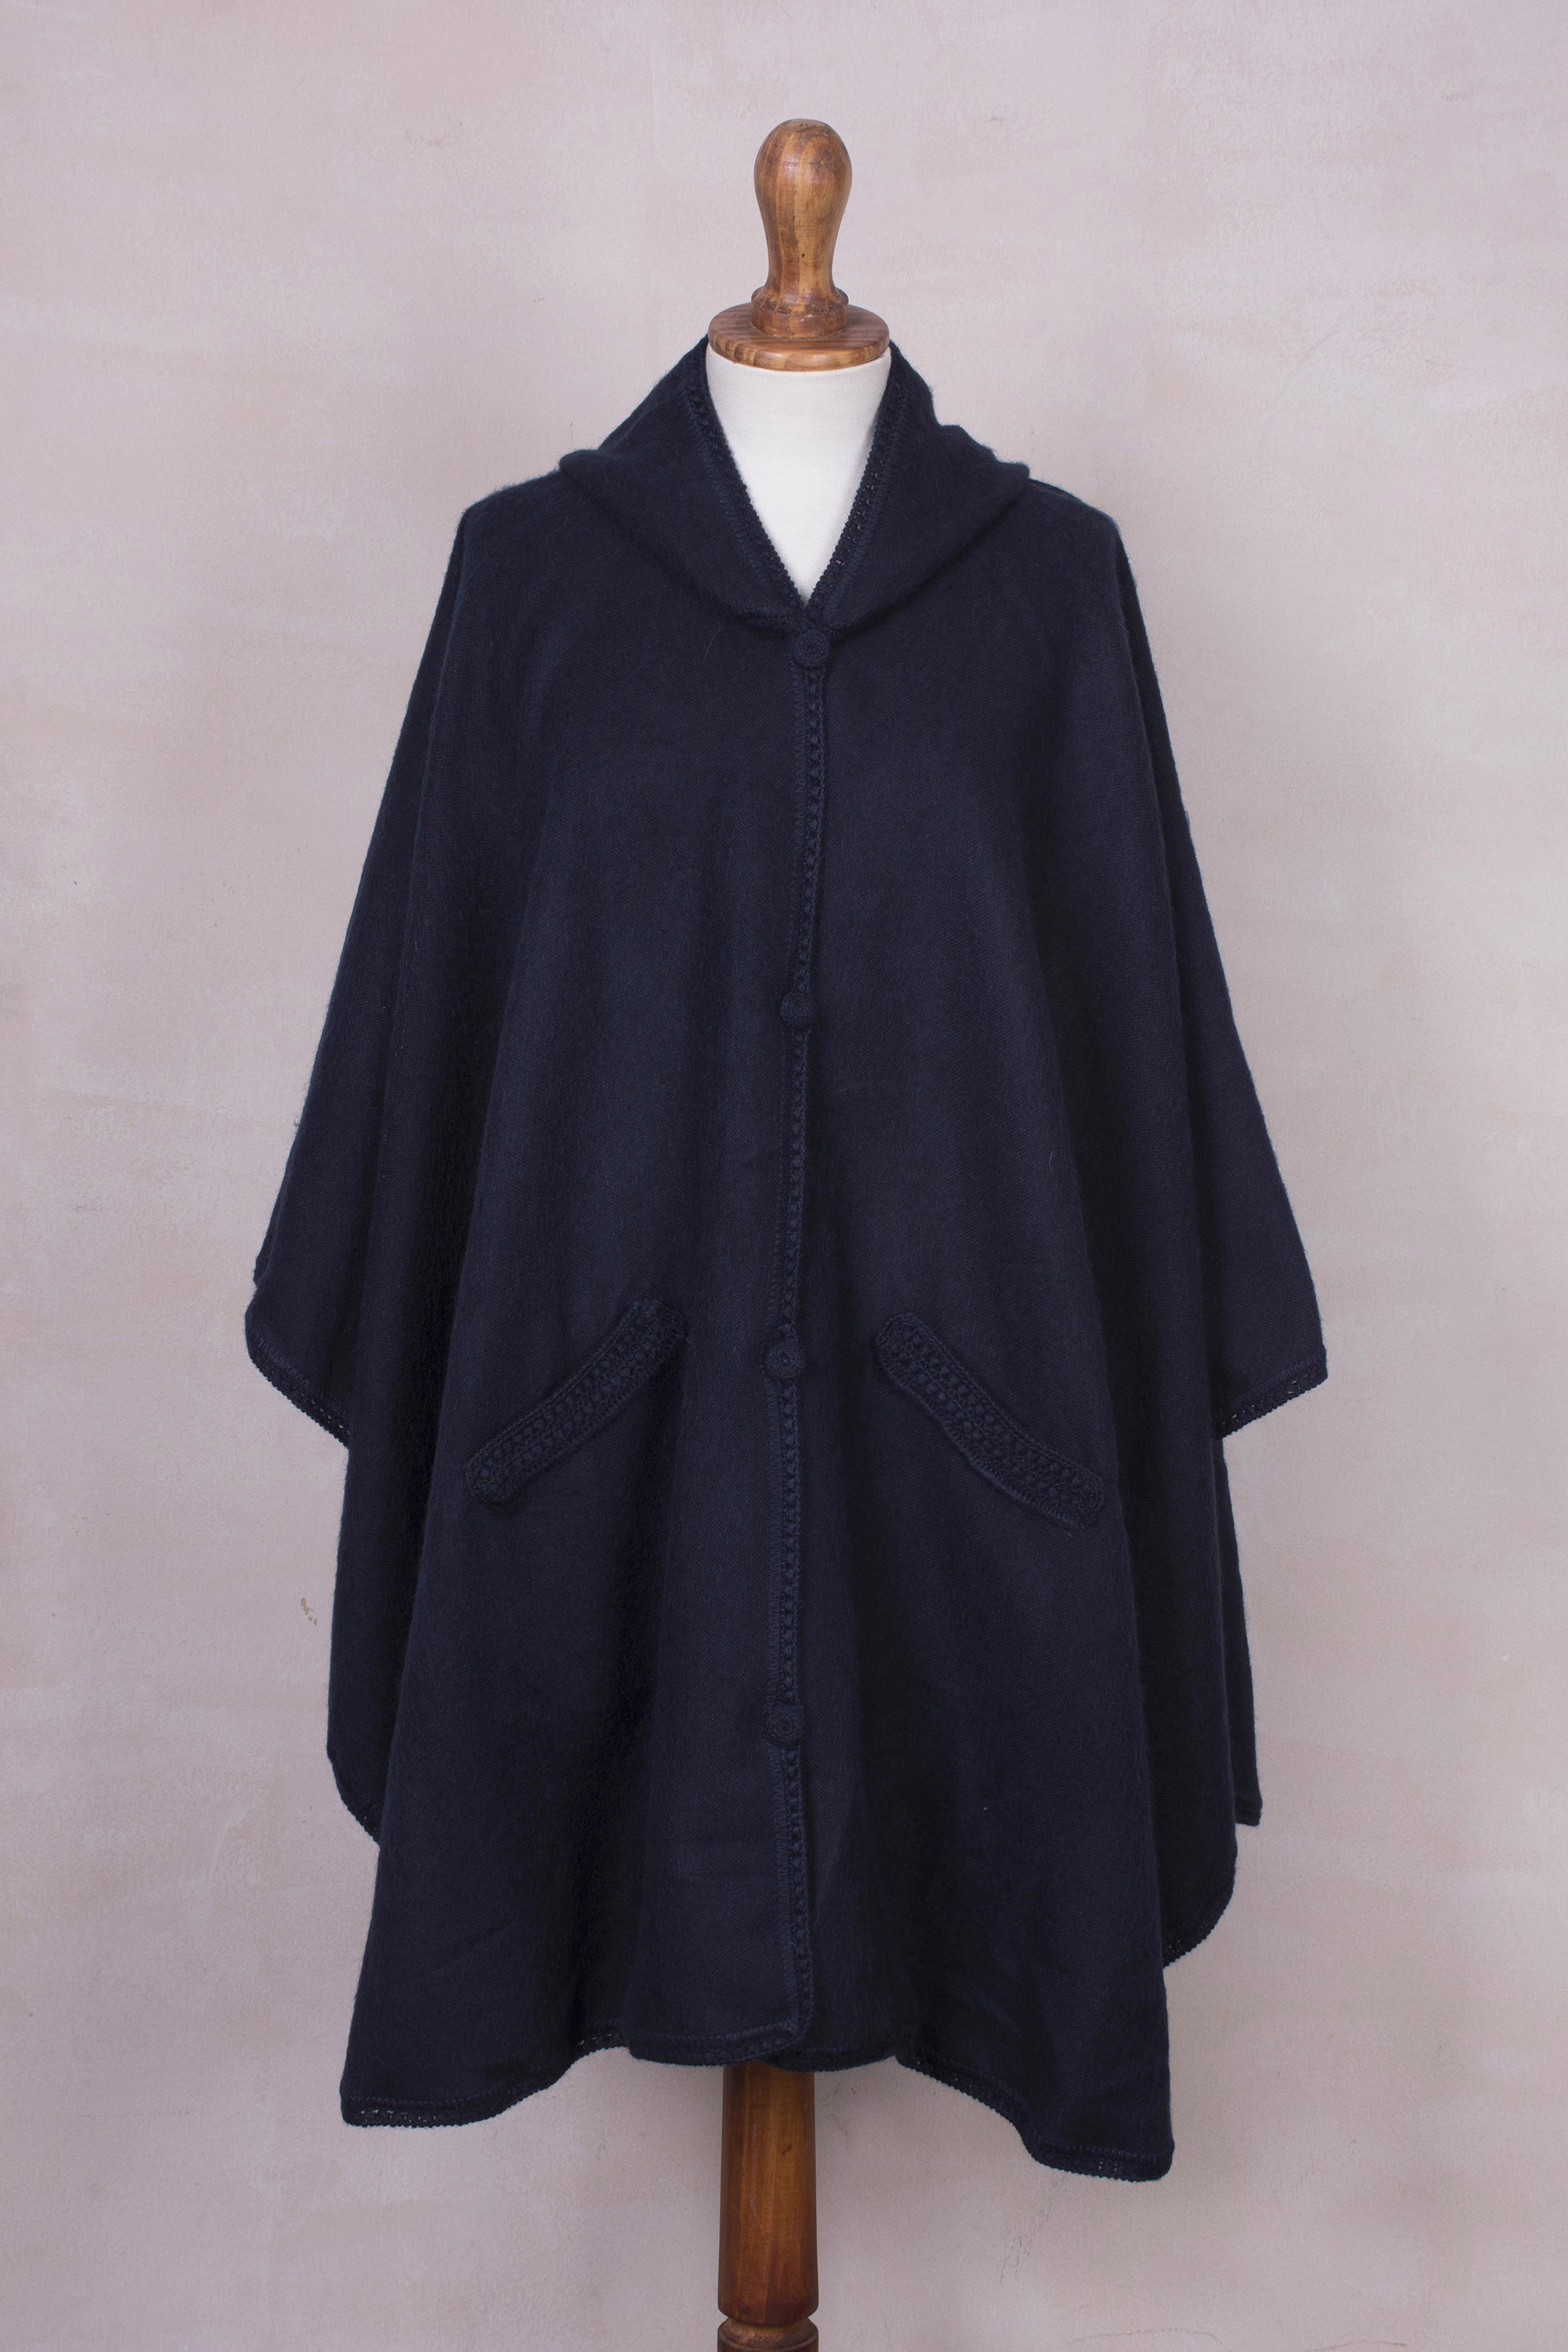 Hooded Woven Navy Alpaca Blend Cape - Vision in Navy | NOVICA